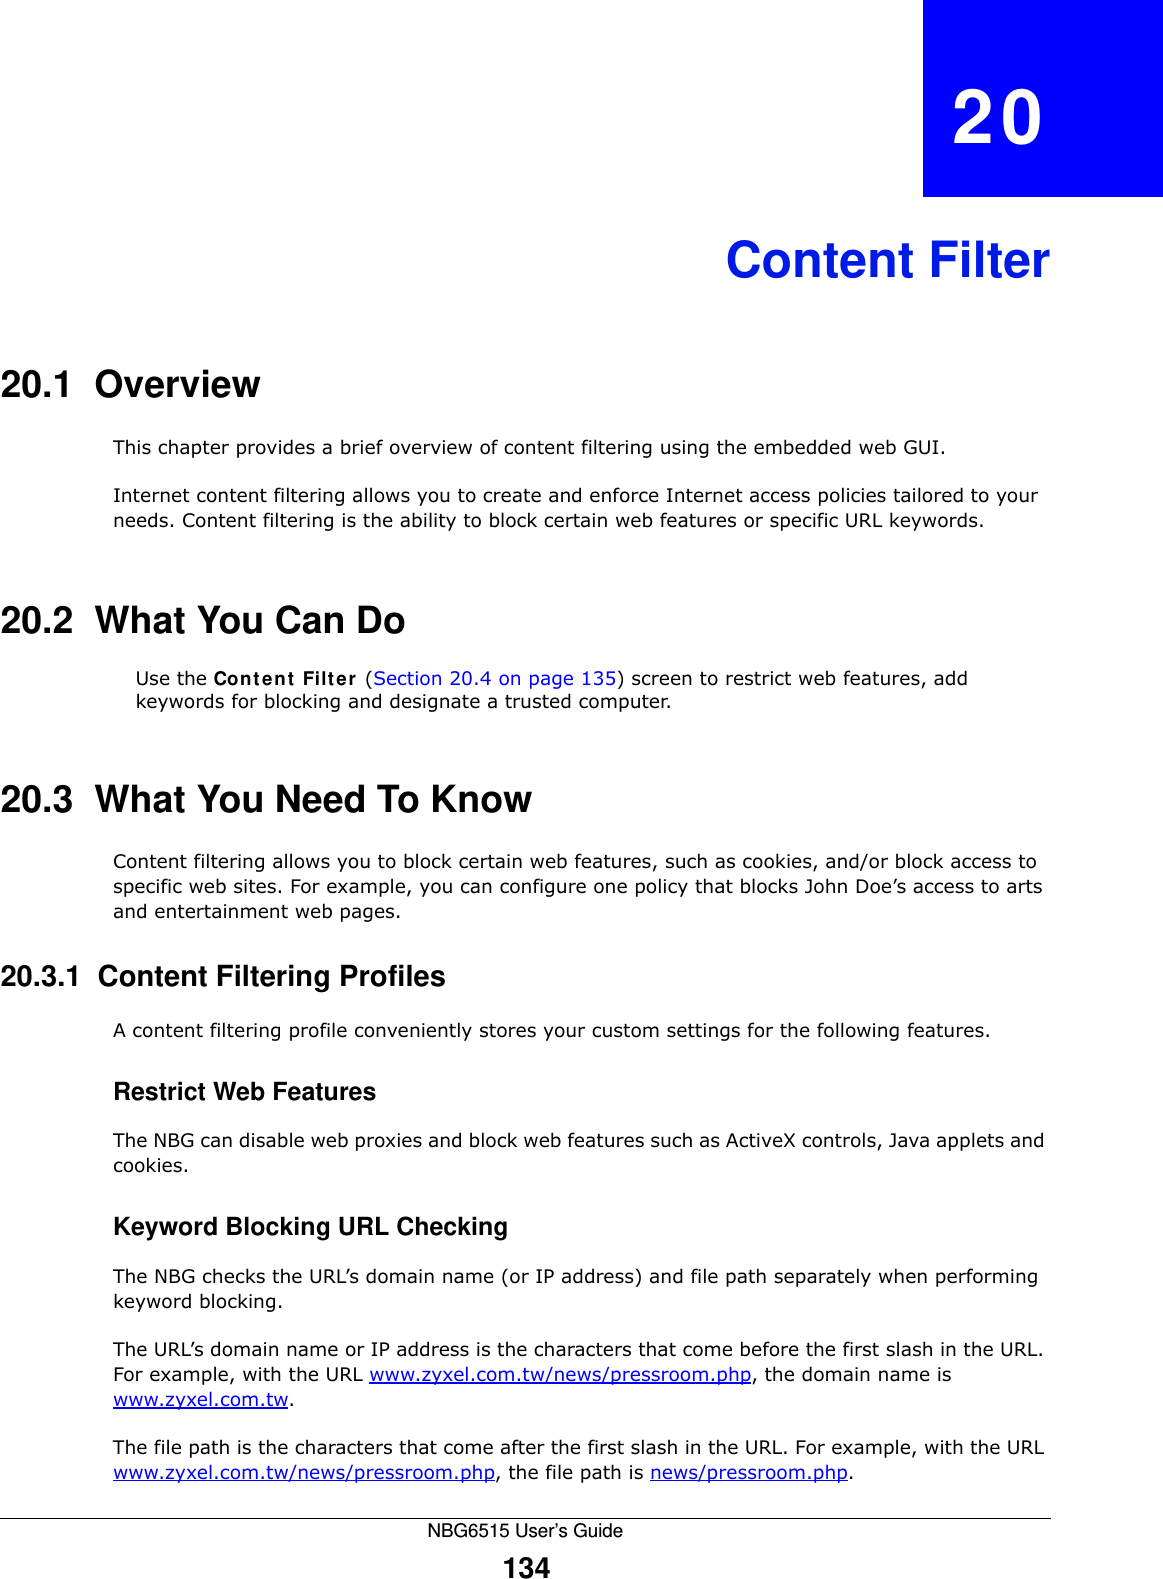 NBG6515 User’s Guide134CHAPTER   20Content Filter20.1  OverviewThis chapter provides a brief overview of content filtering using the embedded web GUI.Internet content filtering allows you to create and enforce Internet access policies tailored to your needs. Content filtering is the ability to block certain web features or specific URL keywords.20.2  What You Can DoUse the Content Filter (Section 20.4 on page 135) screen to restrict web features, add keywords for blocking and designate a trusted computer.20.3  What You Need To KnowContent filtering allows you to block certain web features, such as cookies, and/or block access to specific web sites. For example, you can configure one policy that blocks John Doe’s access to arts and entertainment web pages.20.3.1  Content Filtering ProfilesA content filtering profile conveniently stores your custom settings for the following features.Restrict Web FeaturesThe NBG can disable web proxies and block web features such as ActiveX controls, Java applets and cookies.Keyword Blocking URL CheckingThe NBG checks the URL’s domain name (or IP address) and file path separately when performing keyword blocking. The URL’s domain name or IP address is the characters that come before the first slash in the URL. For example, with the URL www.zyxel.com.tw/news/pressroom.php, the domain name is www.zyxel.com.tw.The file path is the characters that come after the first slash in the URL. For example, with the URL www.zyxel.com.tw/news/pressroom.php, the file path is news/pressroom.php.